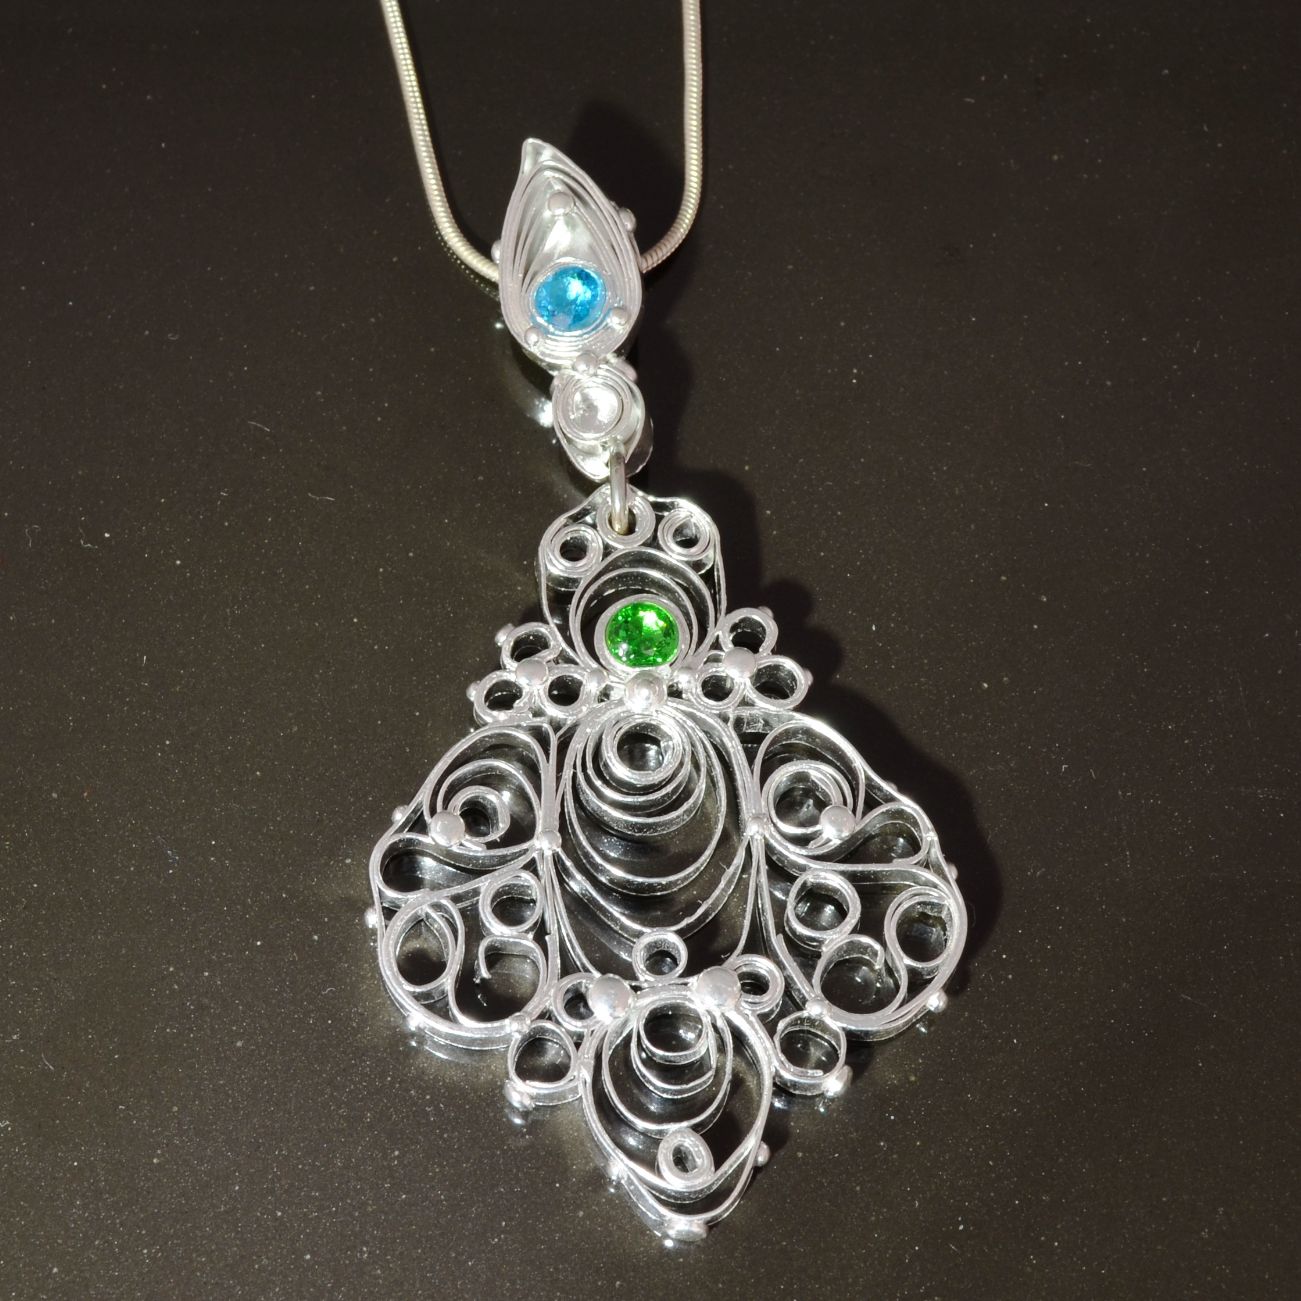 Quilligree Silver Clay Pendant by Tracey Spurgin of Craftworx Jewellery Workshops